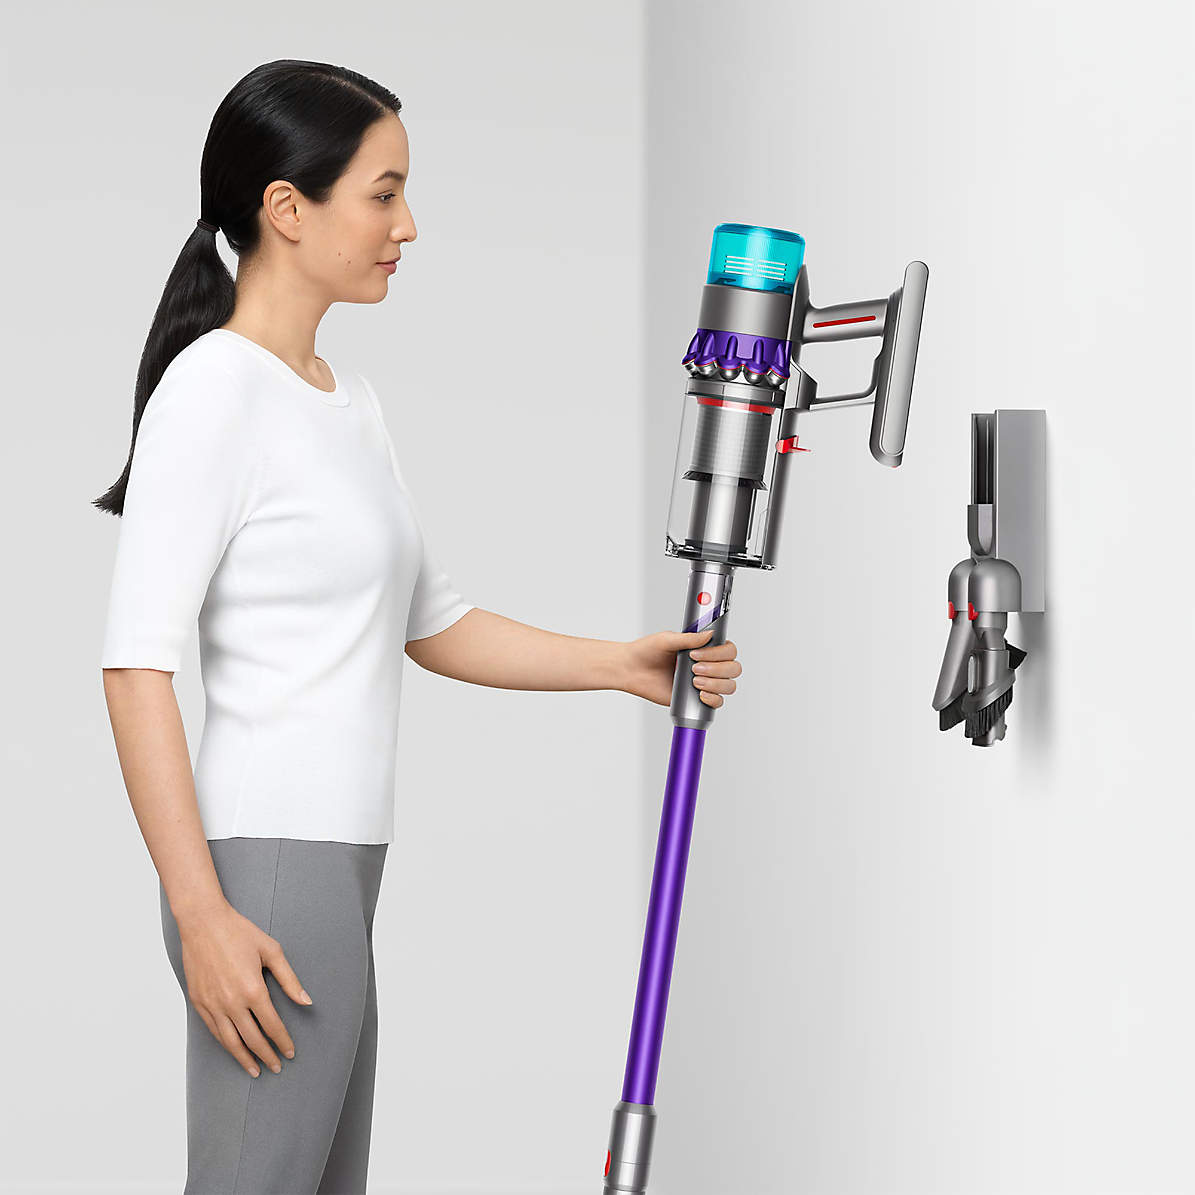 Finally found a Blue Filter for the V15 Detect I wasn't a fan of the Purple  one : r/dyson